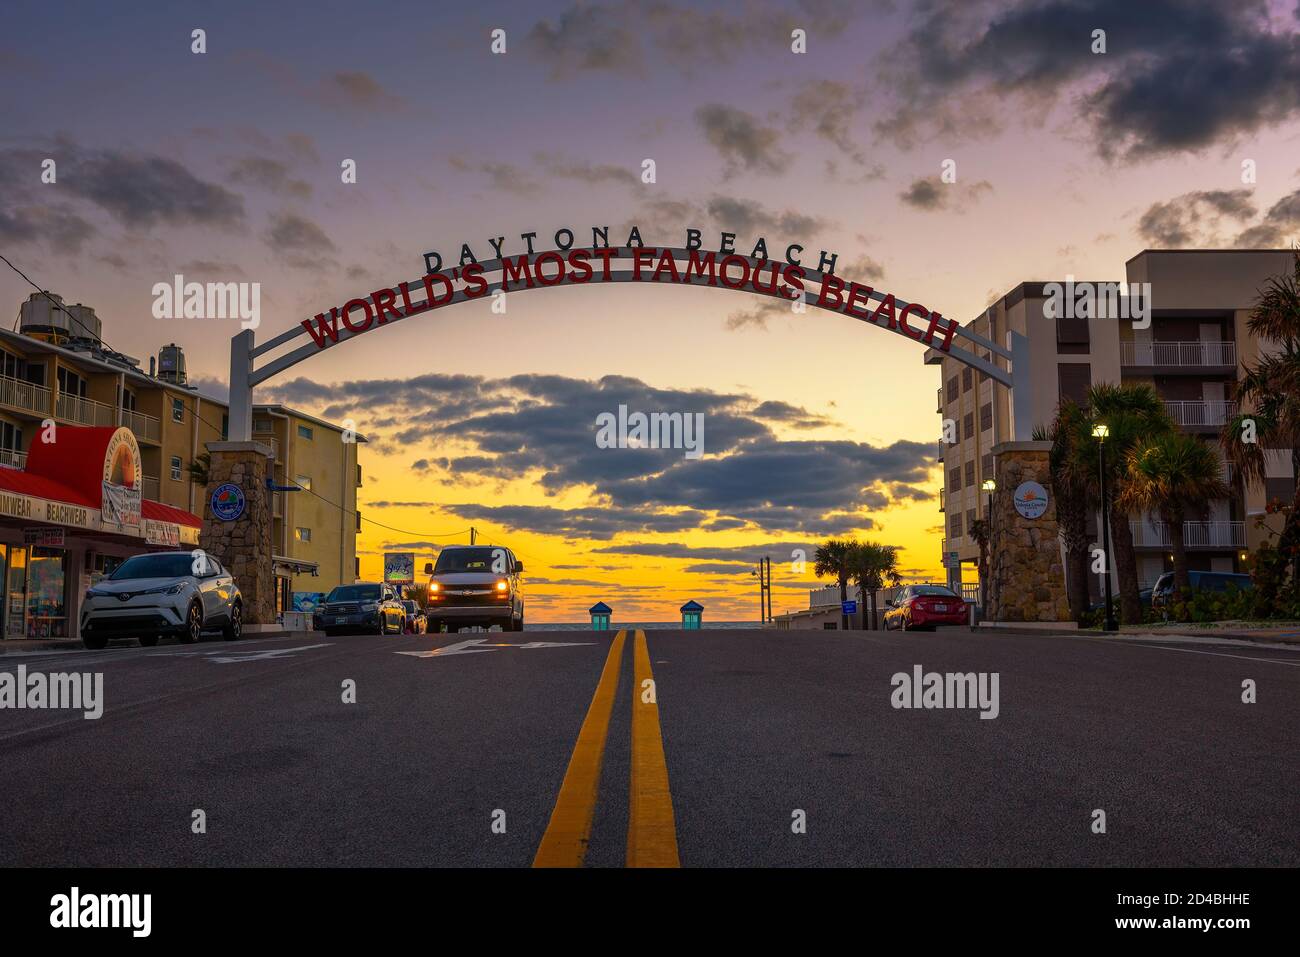 Daytona Beach welcome sign stretched across the street at sunrise Stock Photo